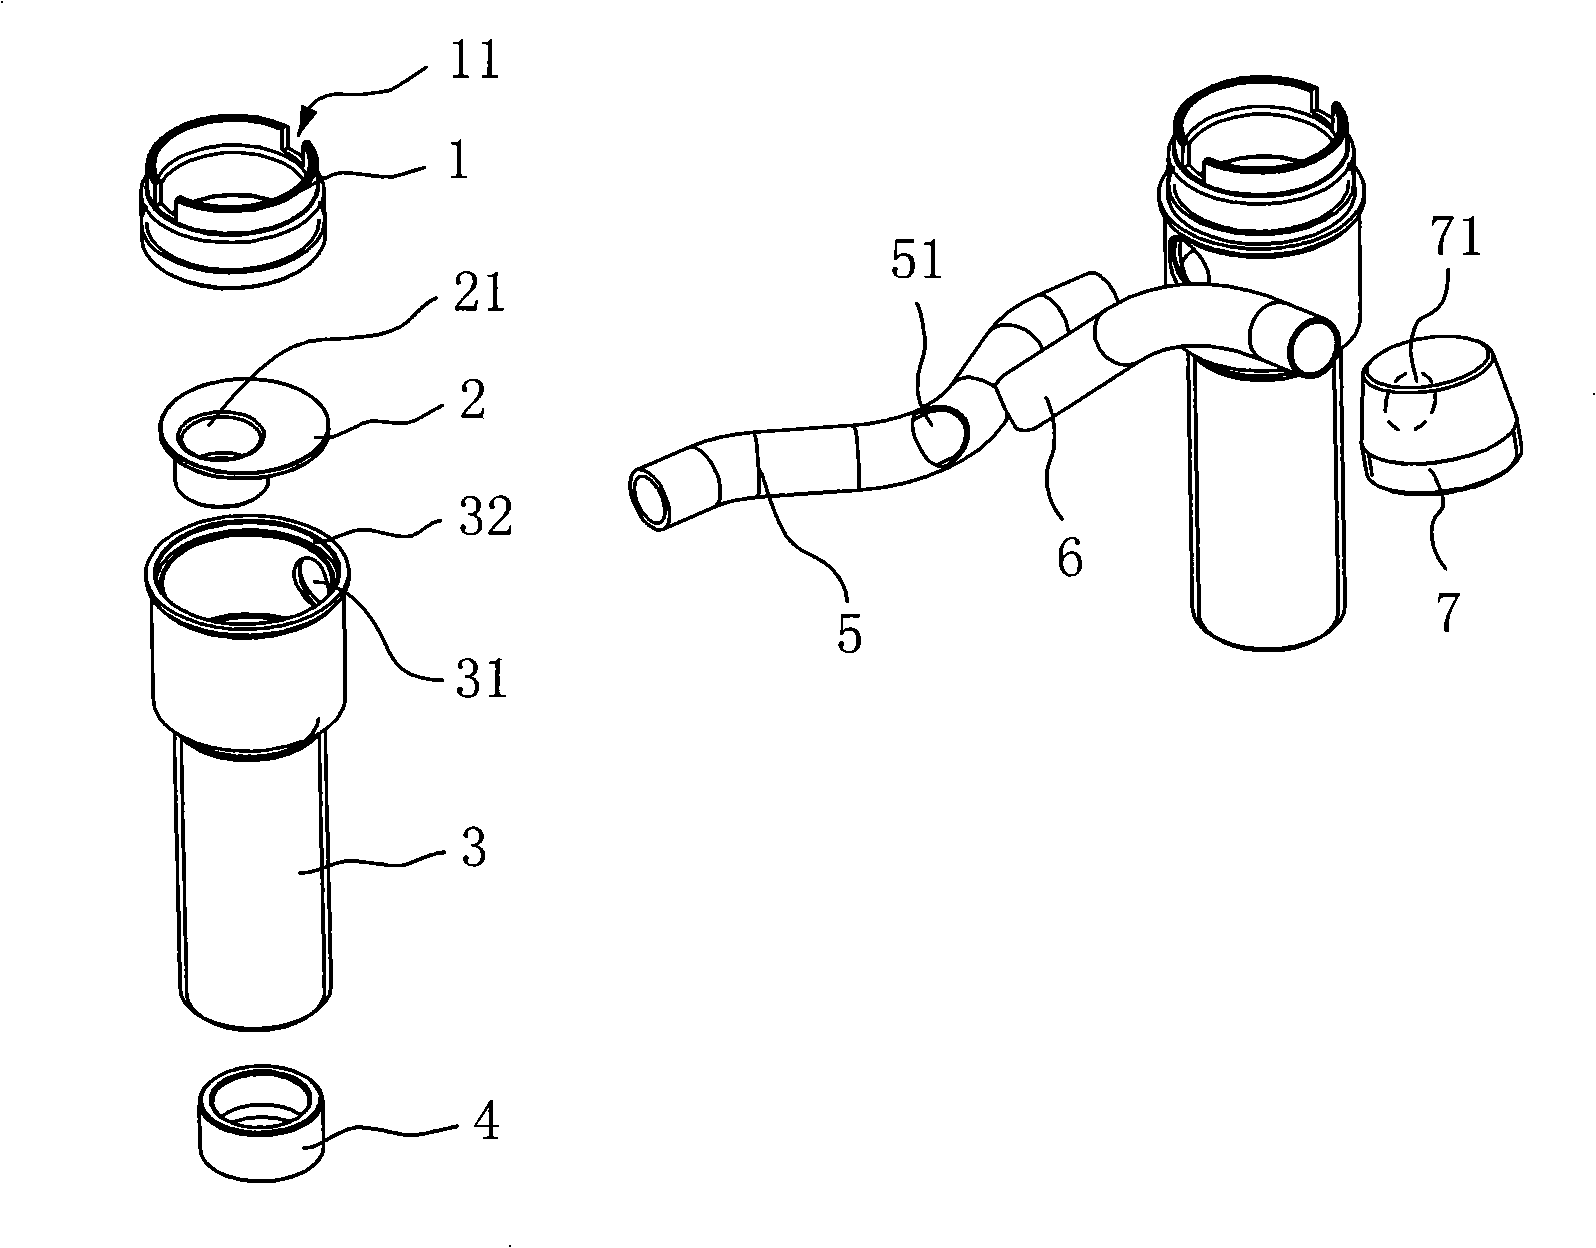 Process for manufacturing tap body